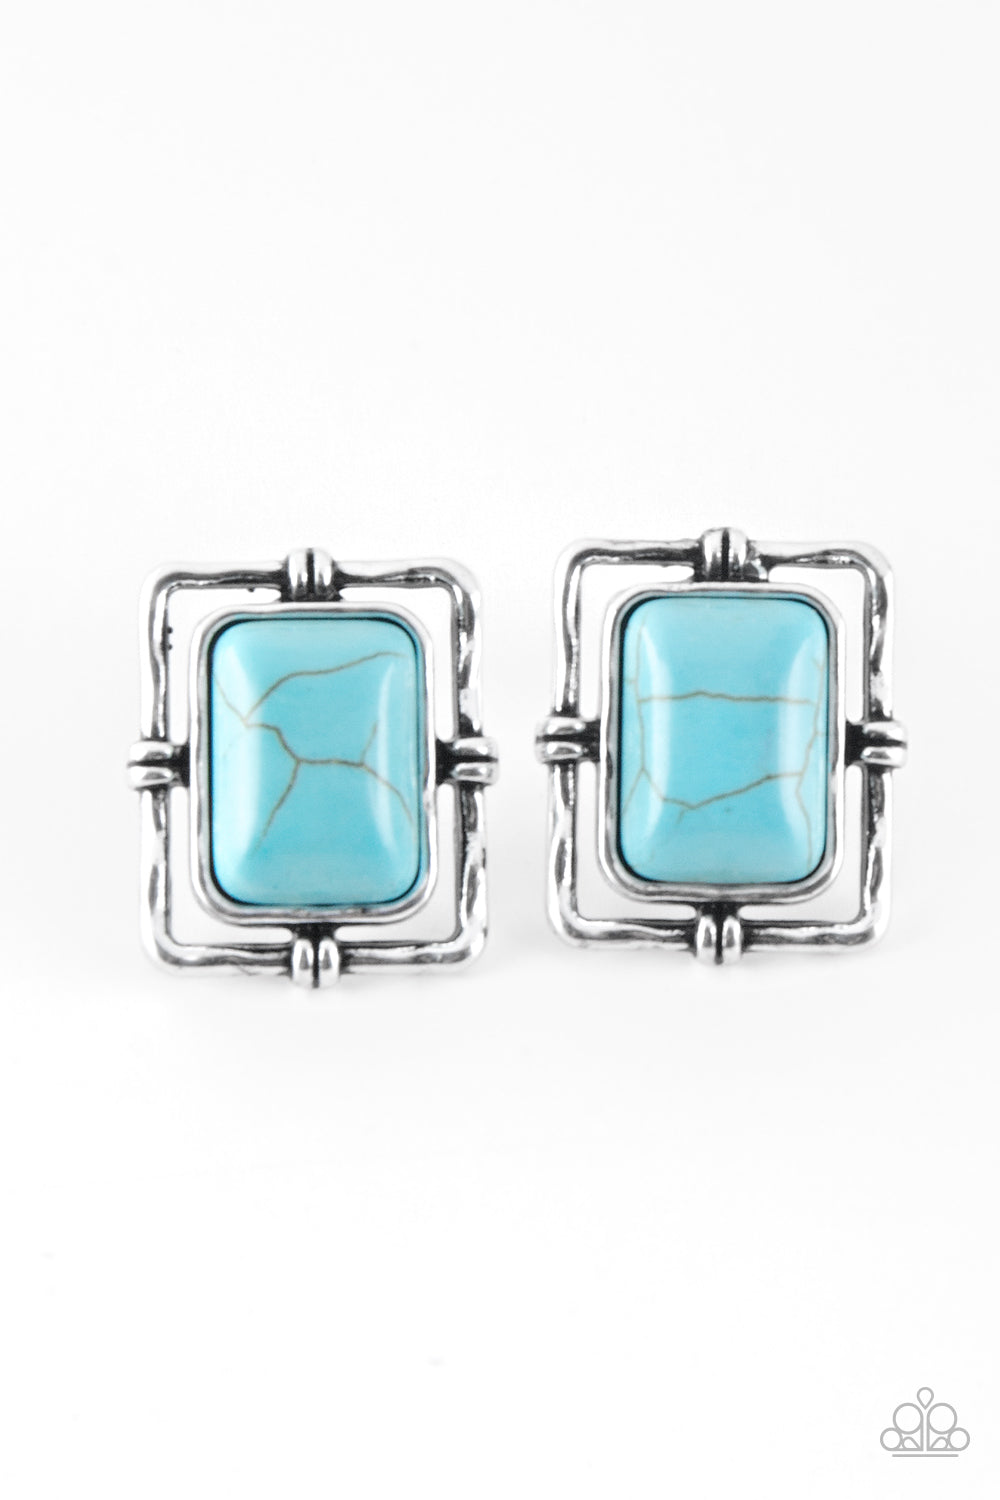 CENTER STAGECOACH - BLUE TURQUOISE RECTANGLE SILVER FRAME EARRINGS